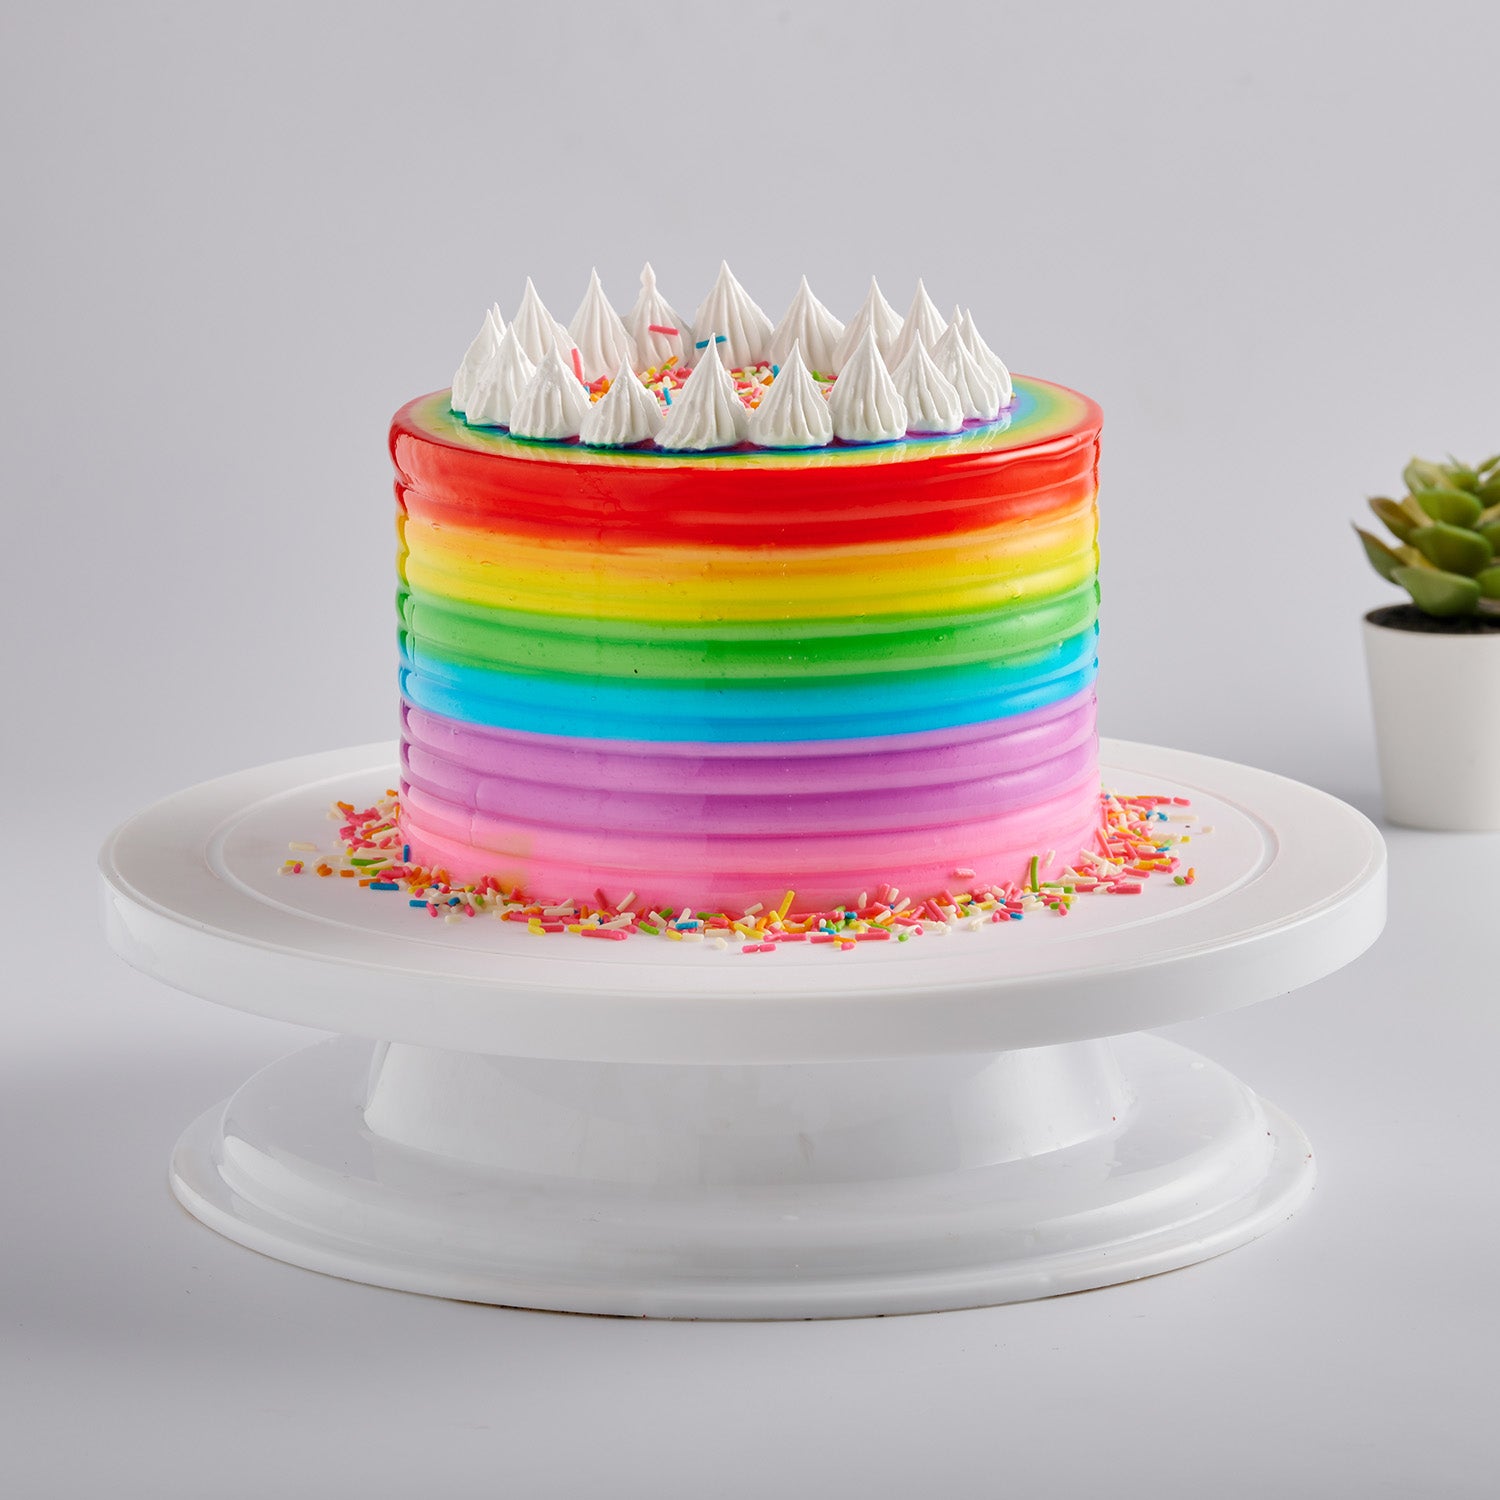 Rainbow Cake 3 Kg: Gift/Send Single Pages Gifts Online HD1046885 |IGP.com